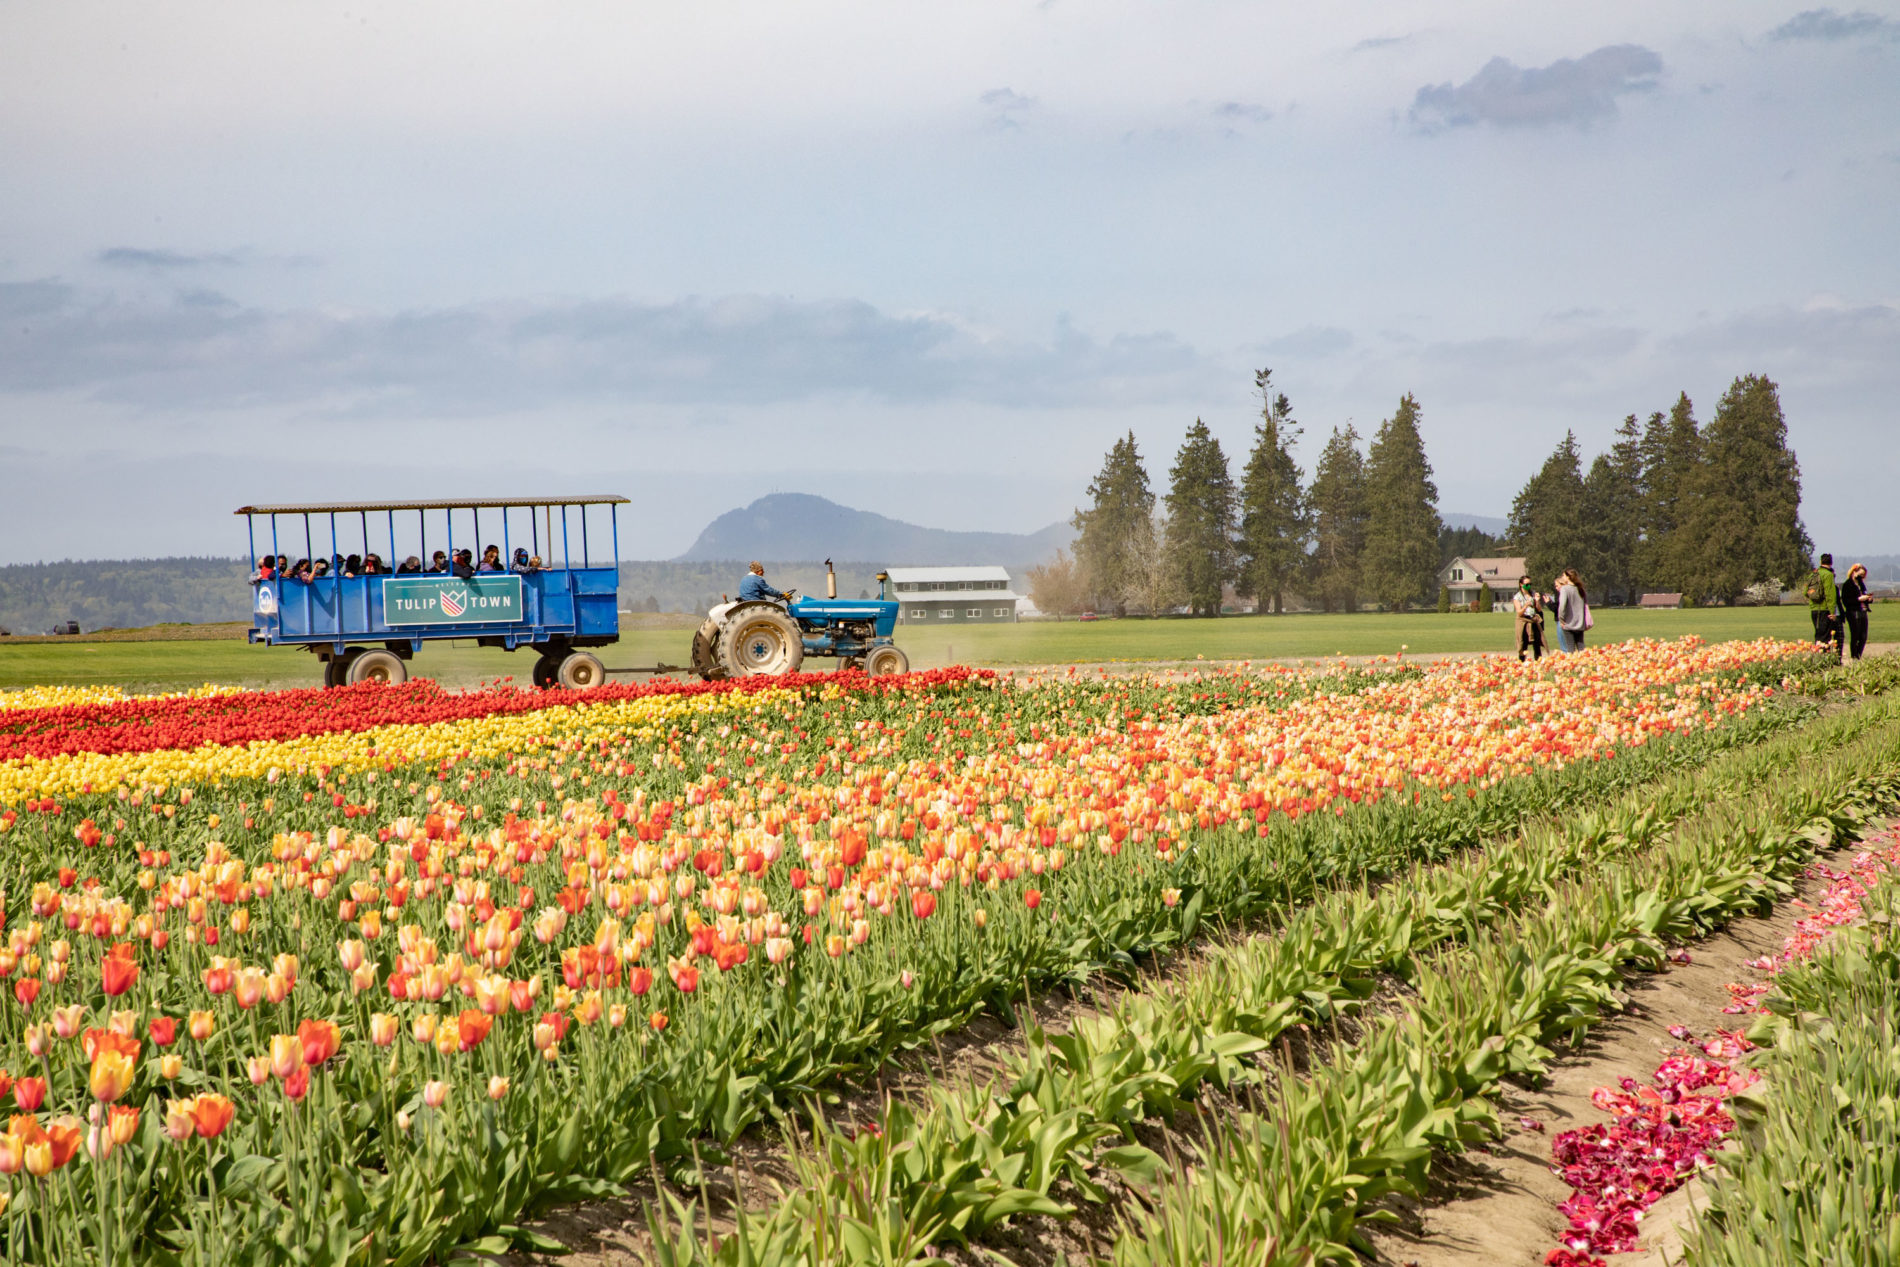 Many people opt to get a higher view and ride the trolley around the tulip fields during the festival.